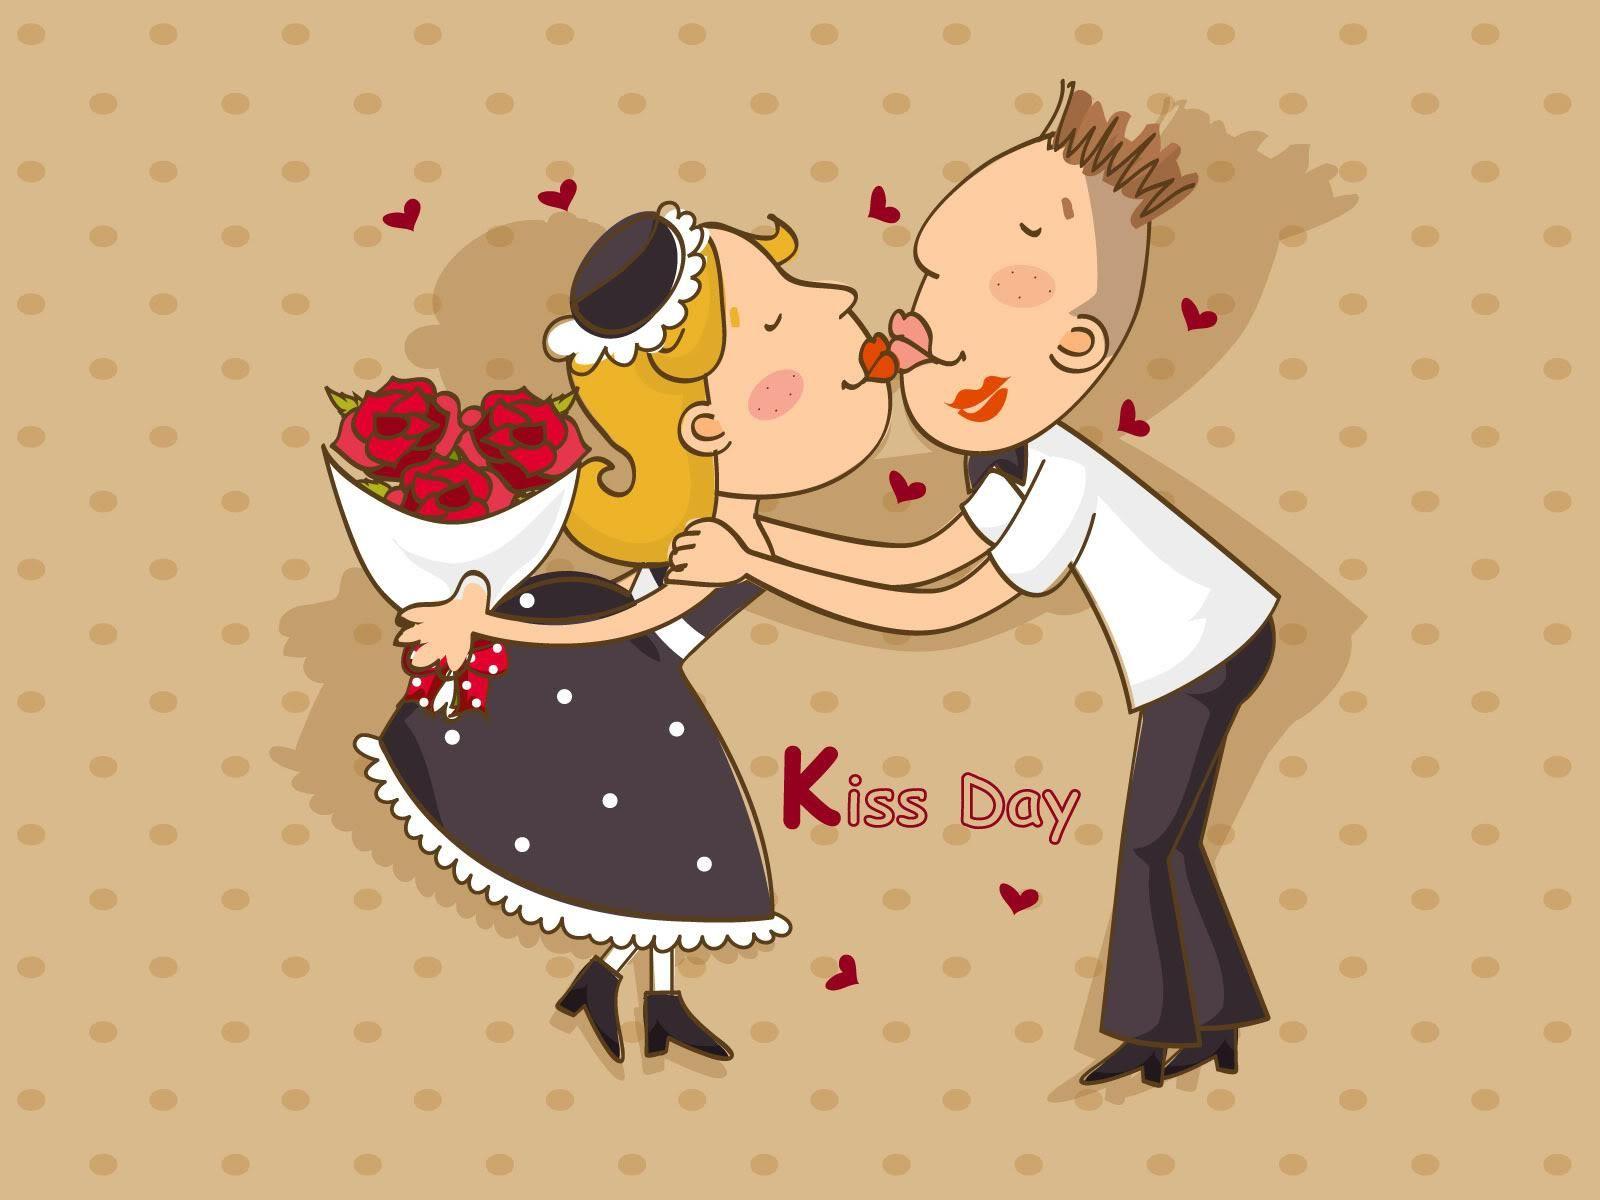 The kiss day wallpaper. The kiss day